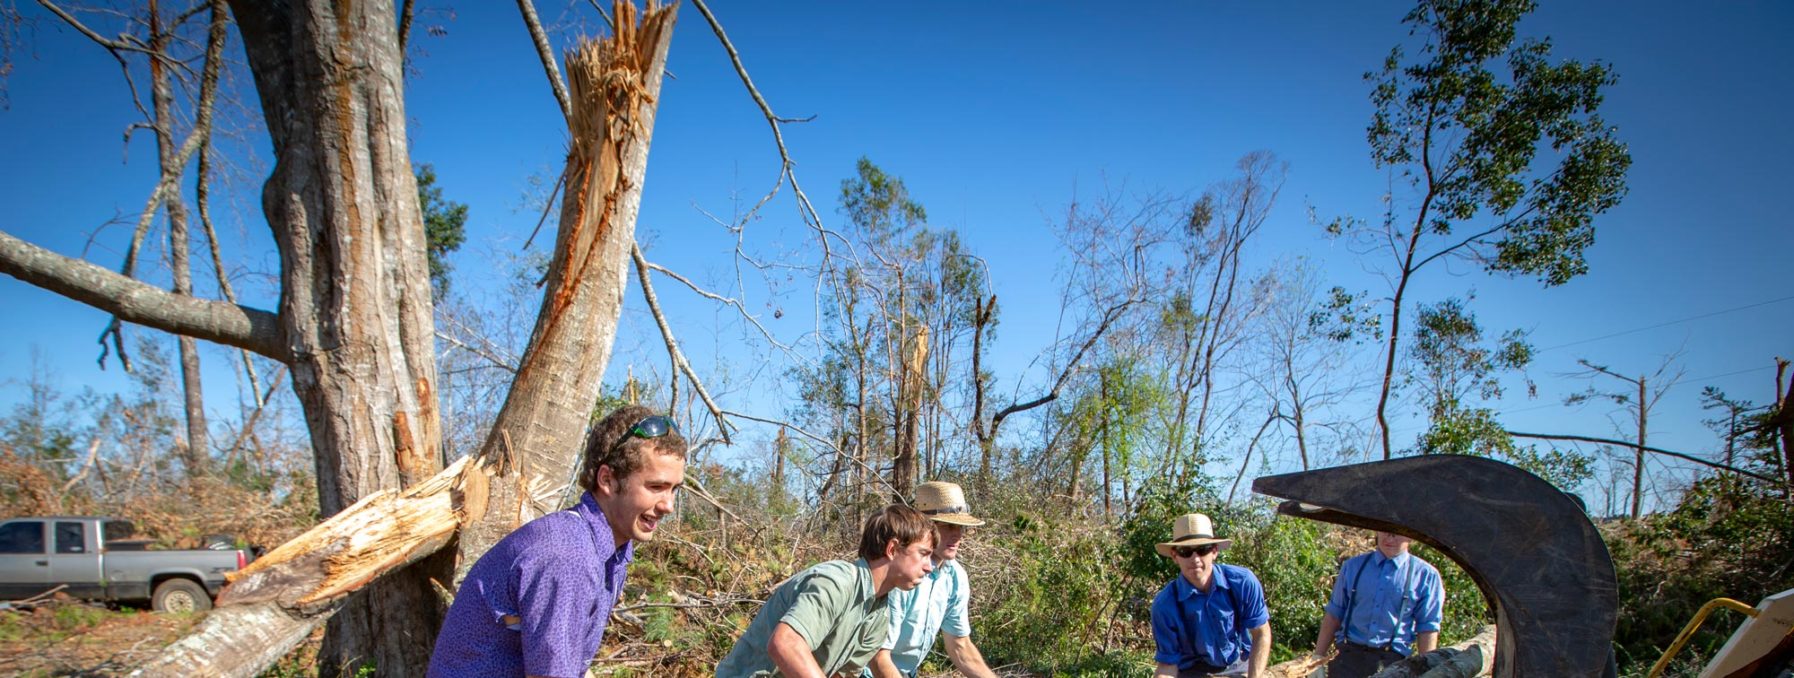 Photo of volunteers clearing debris and trees in Marianna, Florida.